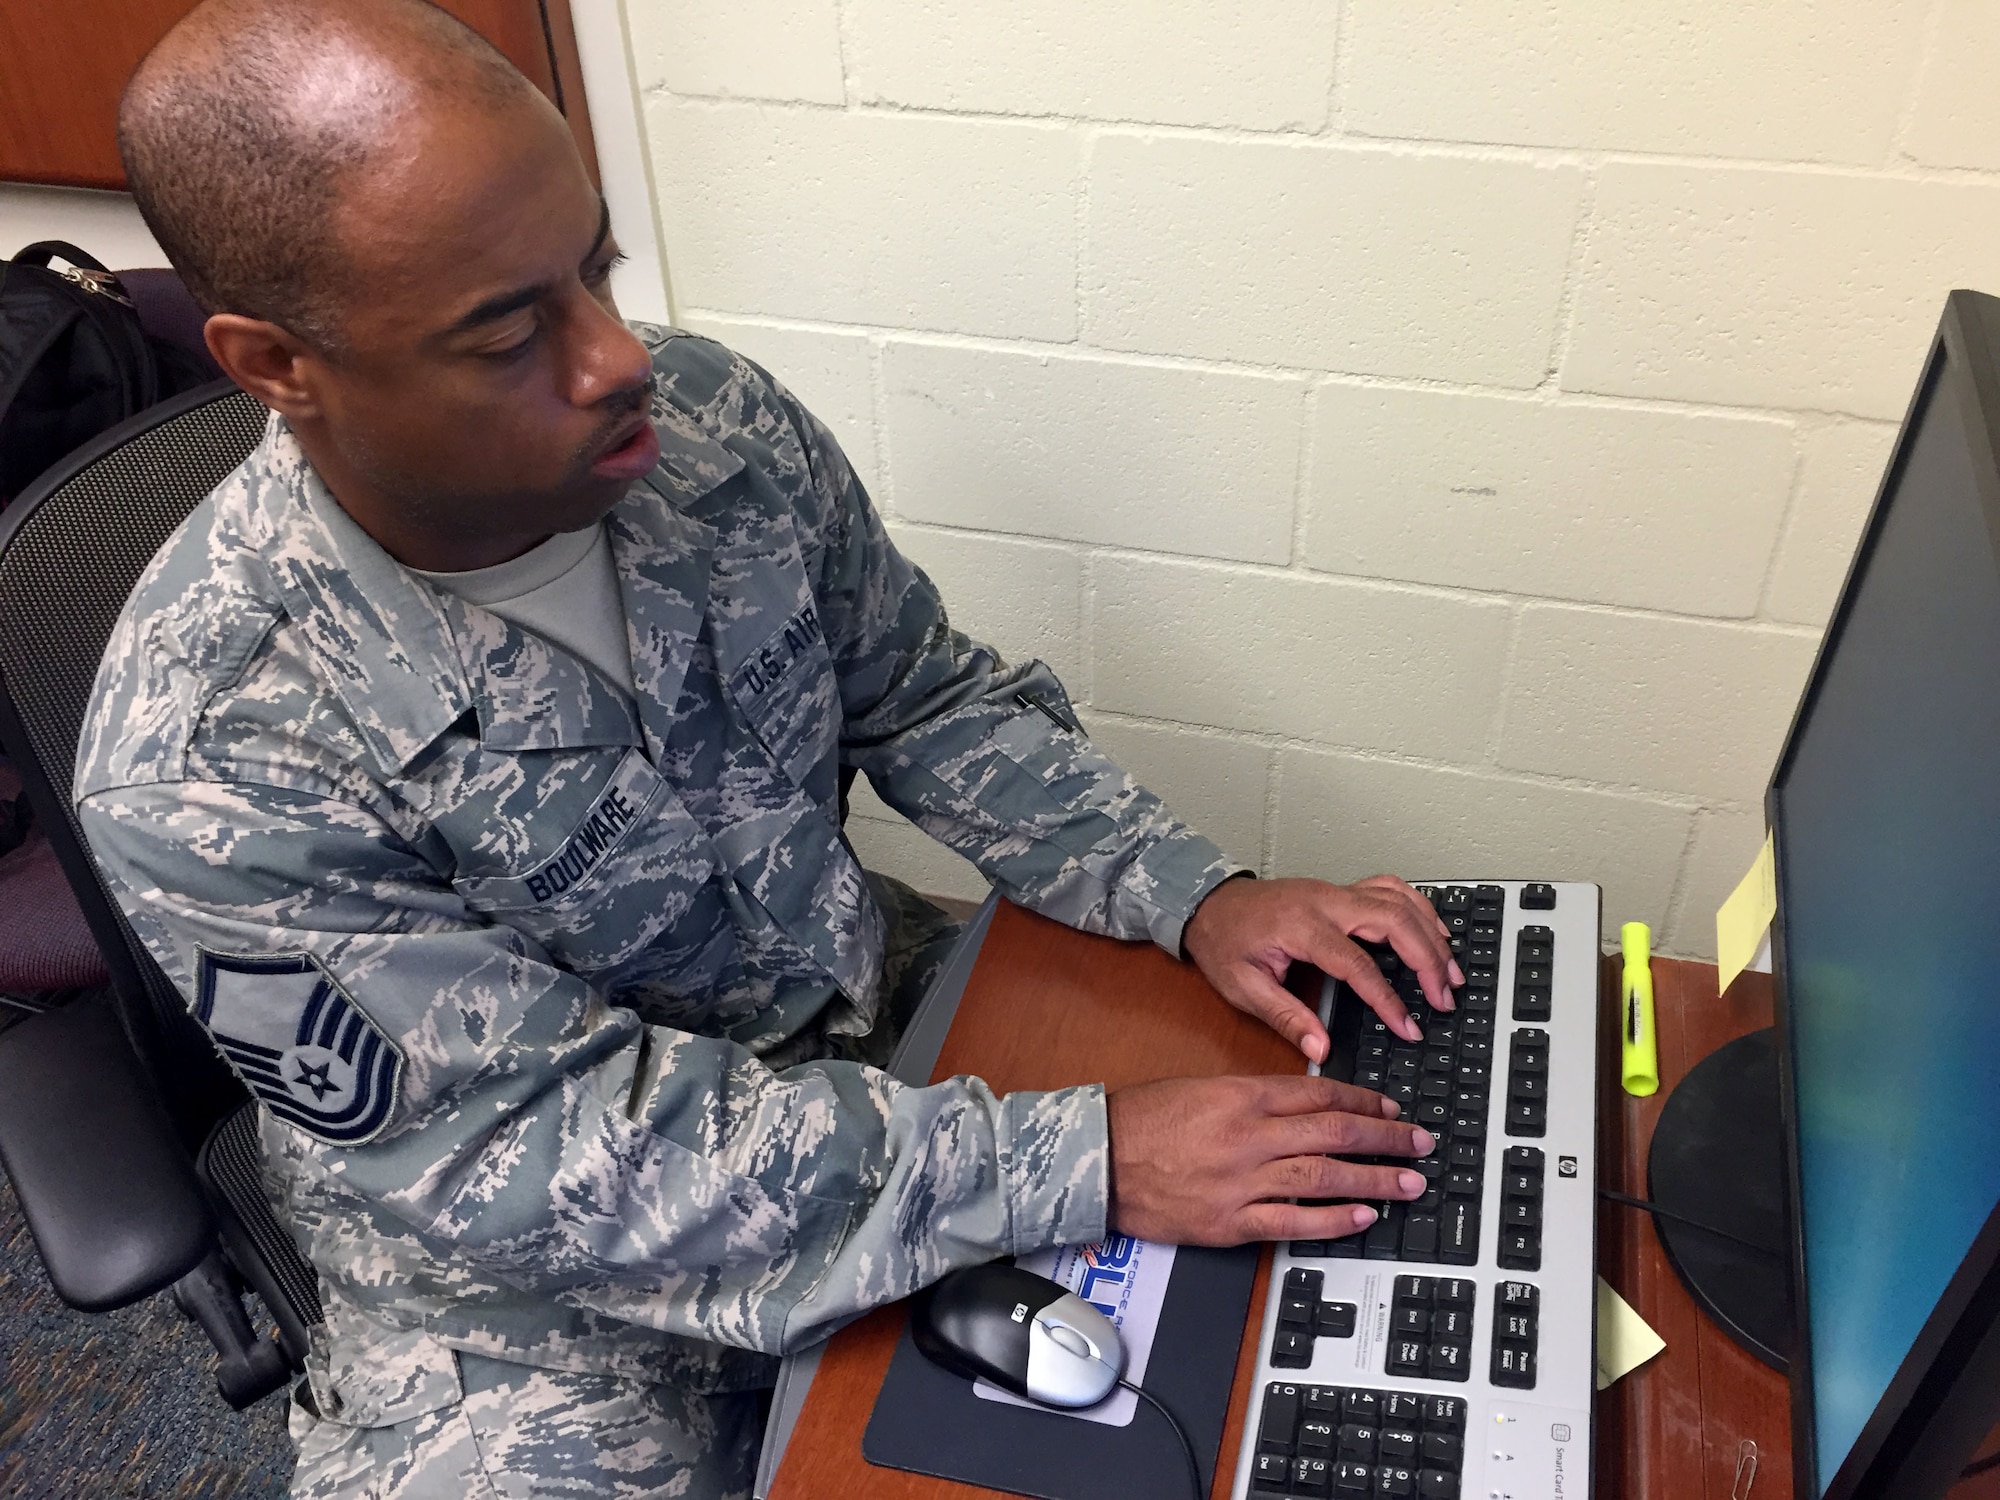 Master. Sgt. George Boulware, 419th Force Support Squadron, works to keep computers operational during two weeks of annual tour training at Joint Base Pearl Harbor-Hickam located on the island of Oahu, Hawaii. (U.S. Air Force photo/Kari Tilton)